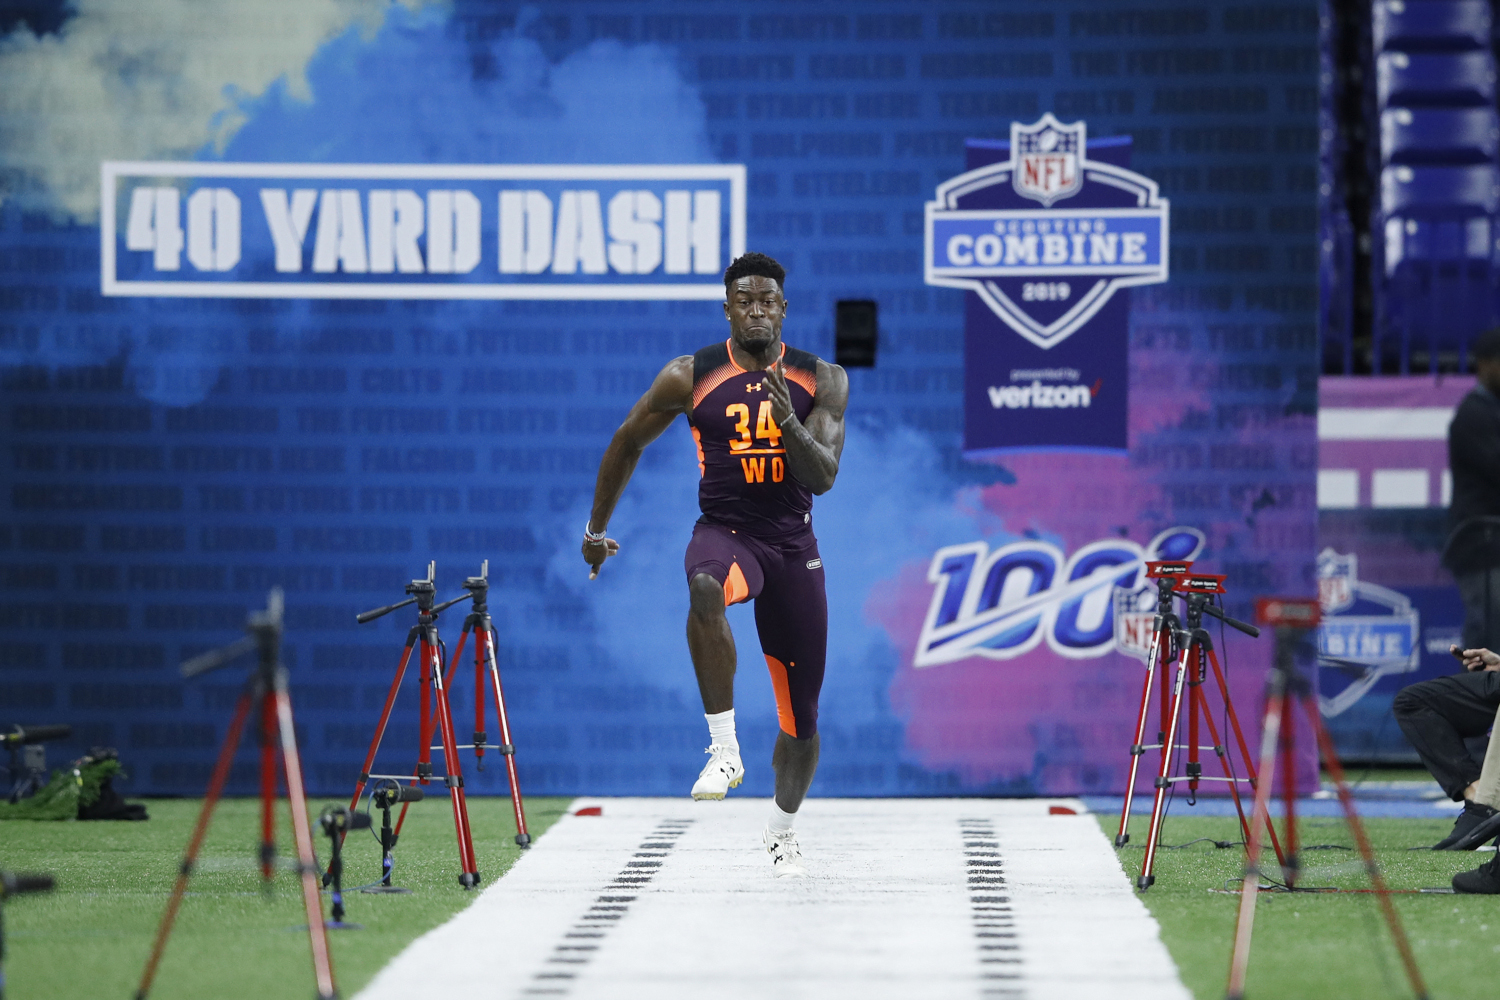 Seattle Seahawks Speedster DK Metcalf Looks to Add His Name to NFL’s Long Legacy of Standout Sprinters